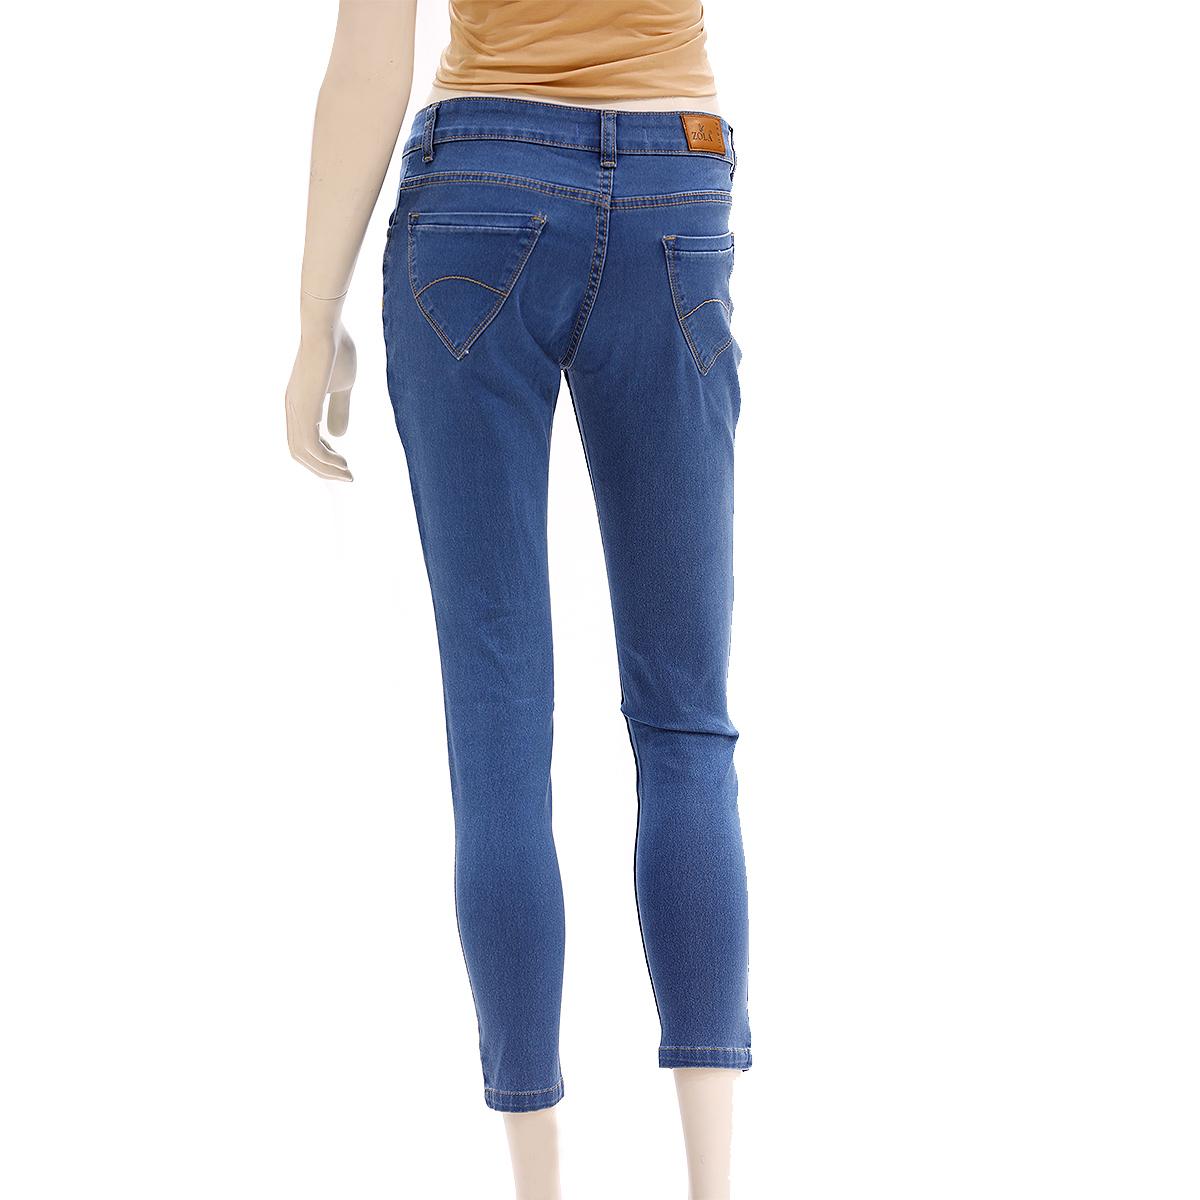 Zola Ankle Length Mid Waist Silky Finished Jeans With 1 Button Fly Front Zip Opening - Stone/Mid Blue, Size-34